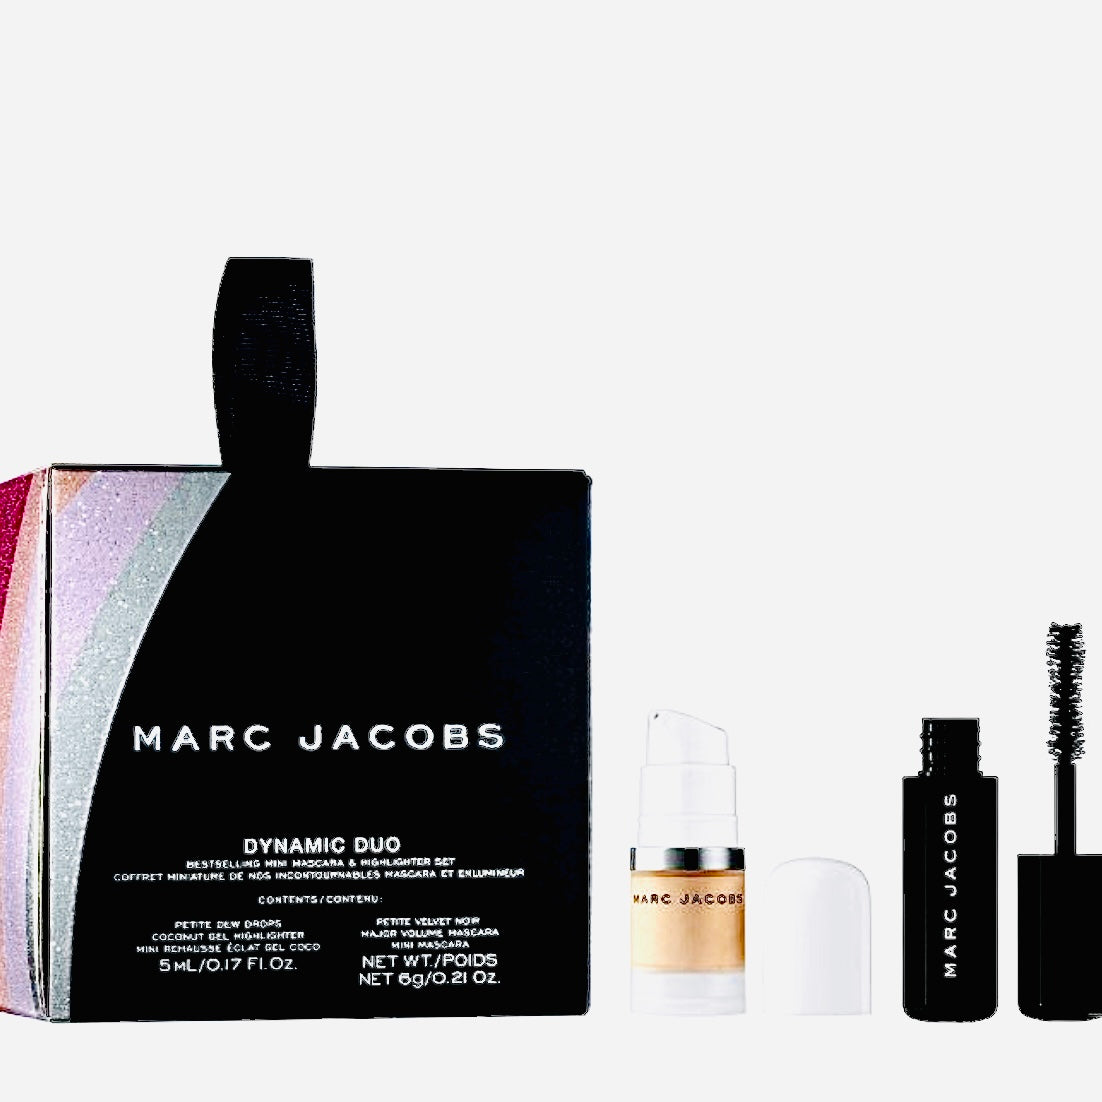 Marc Jacob’s Dynamic Duo Free Gift